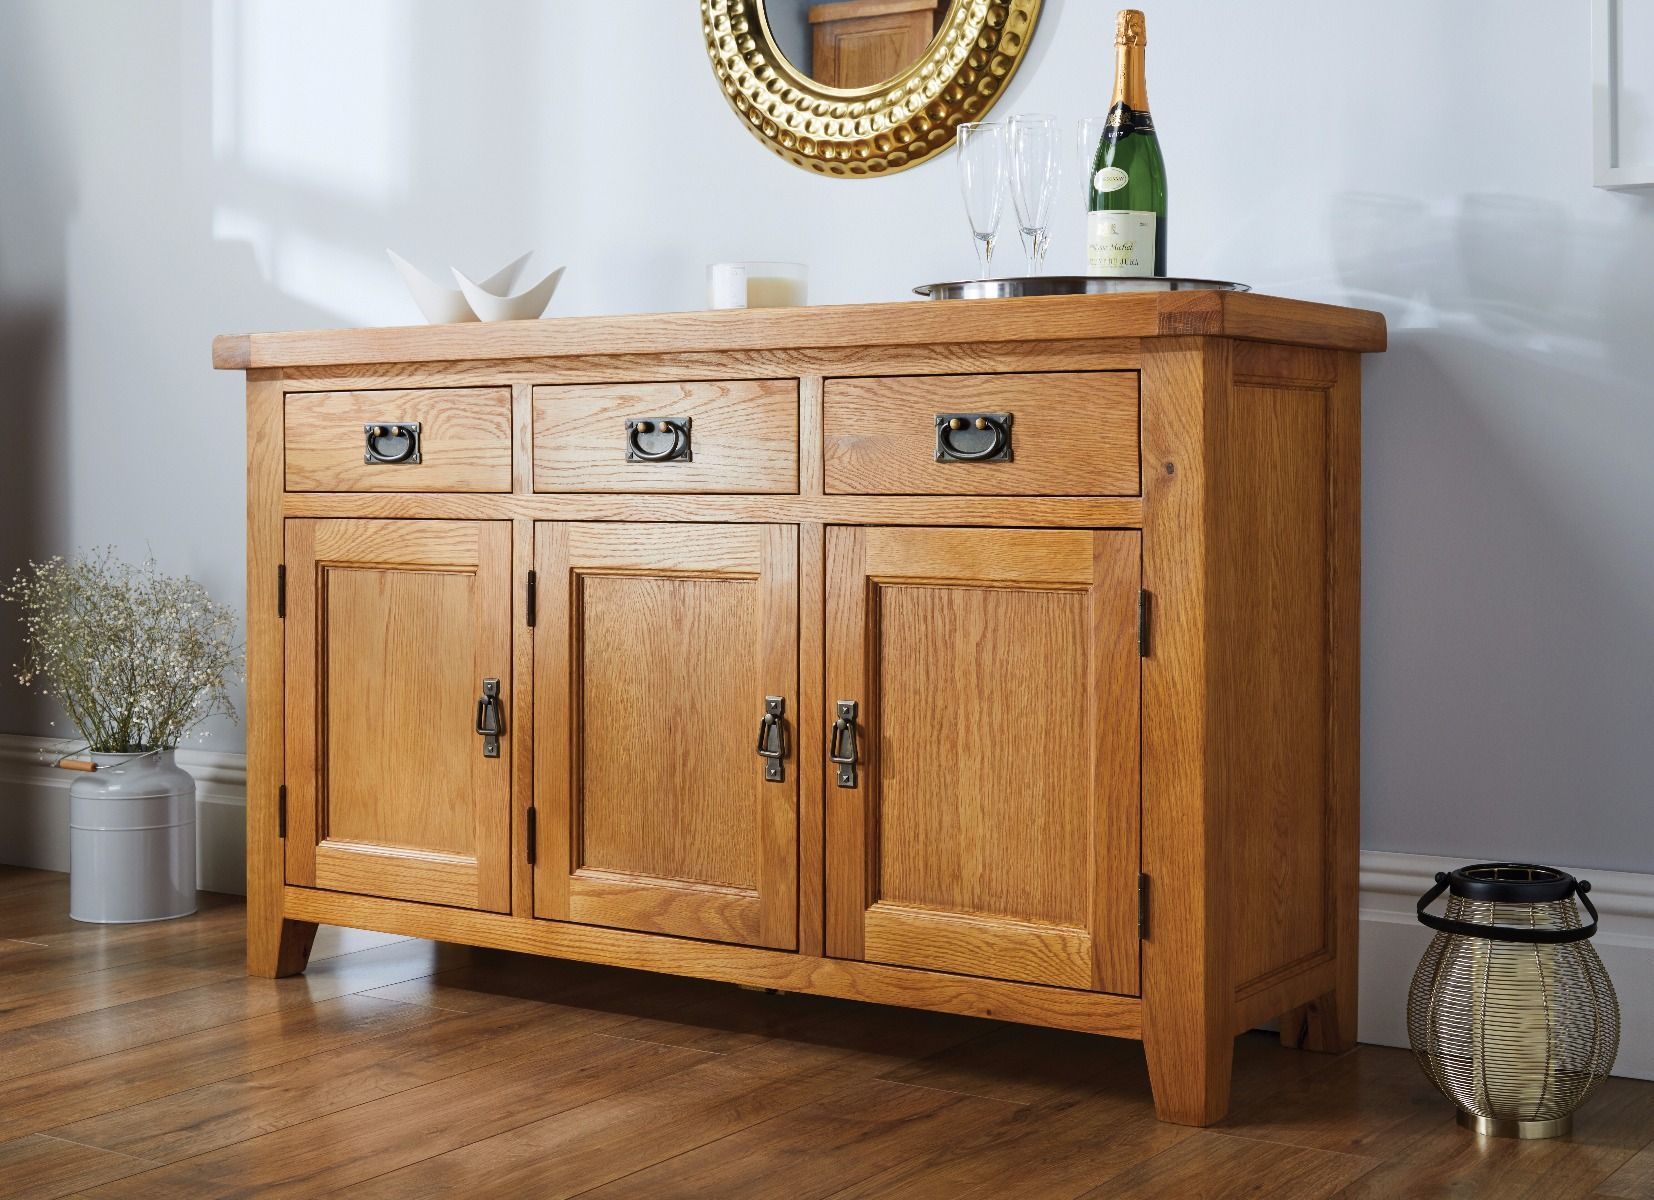 Country Oak Rustic 3 Door Medium Sized Sideboard – Free Delivery | Top  Furniture Regarding Most Up To Date Rustic Oak Sideboards (View 6 of 15)